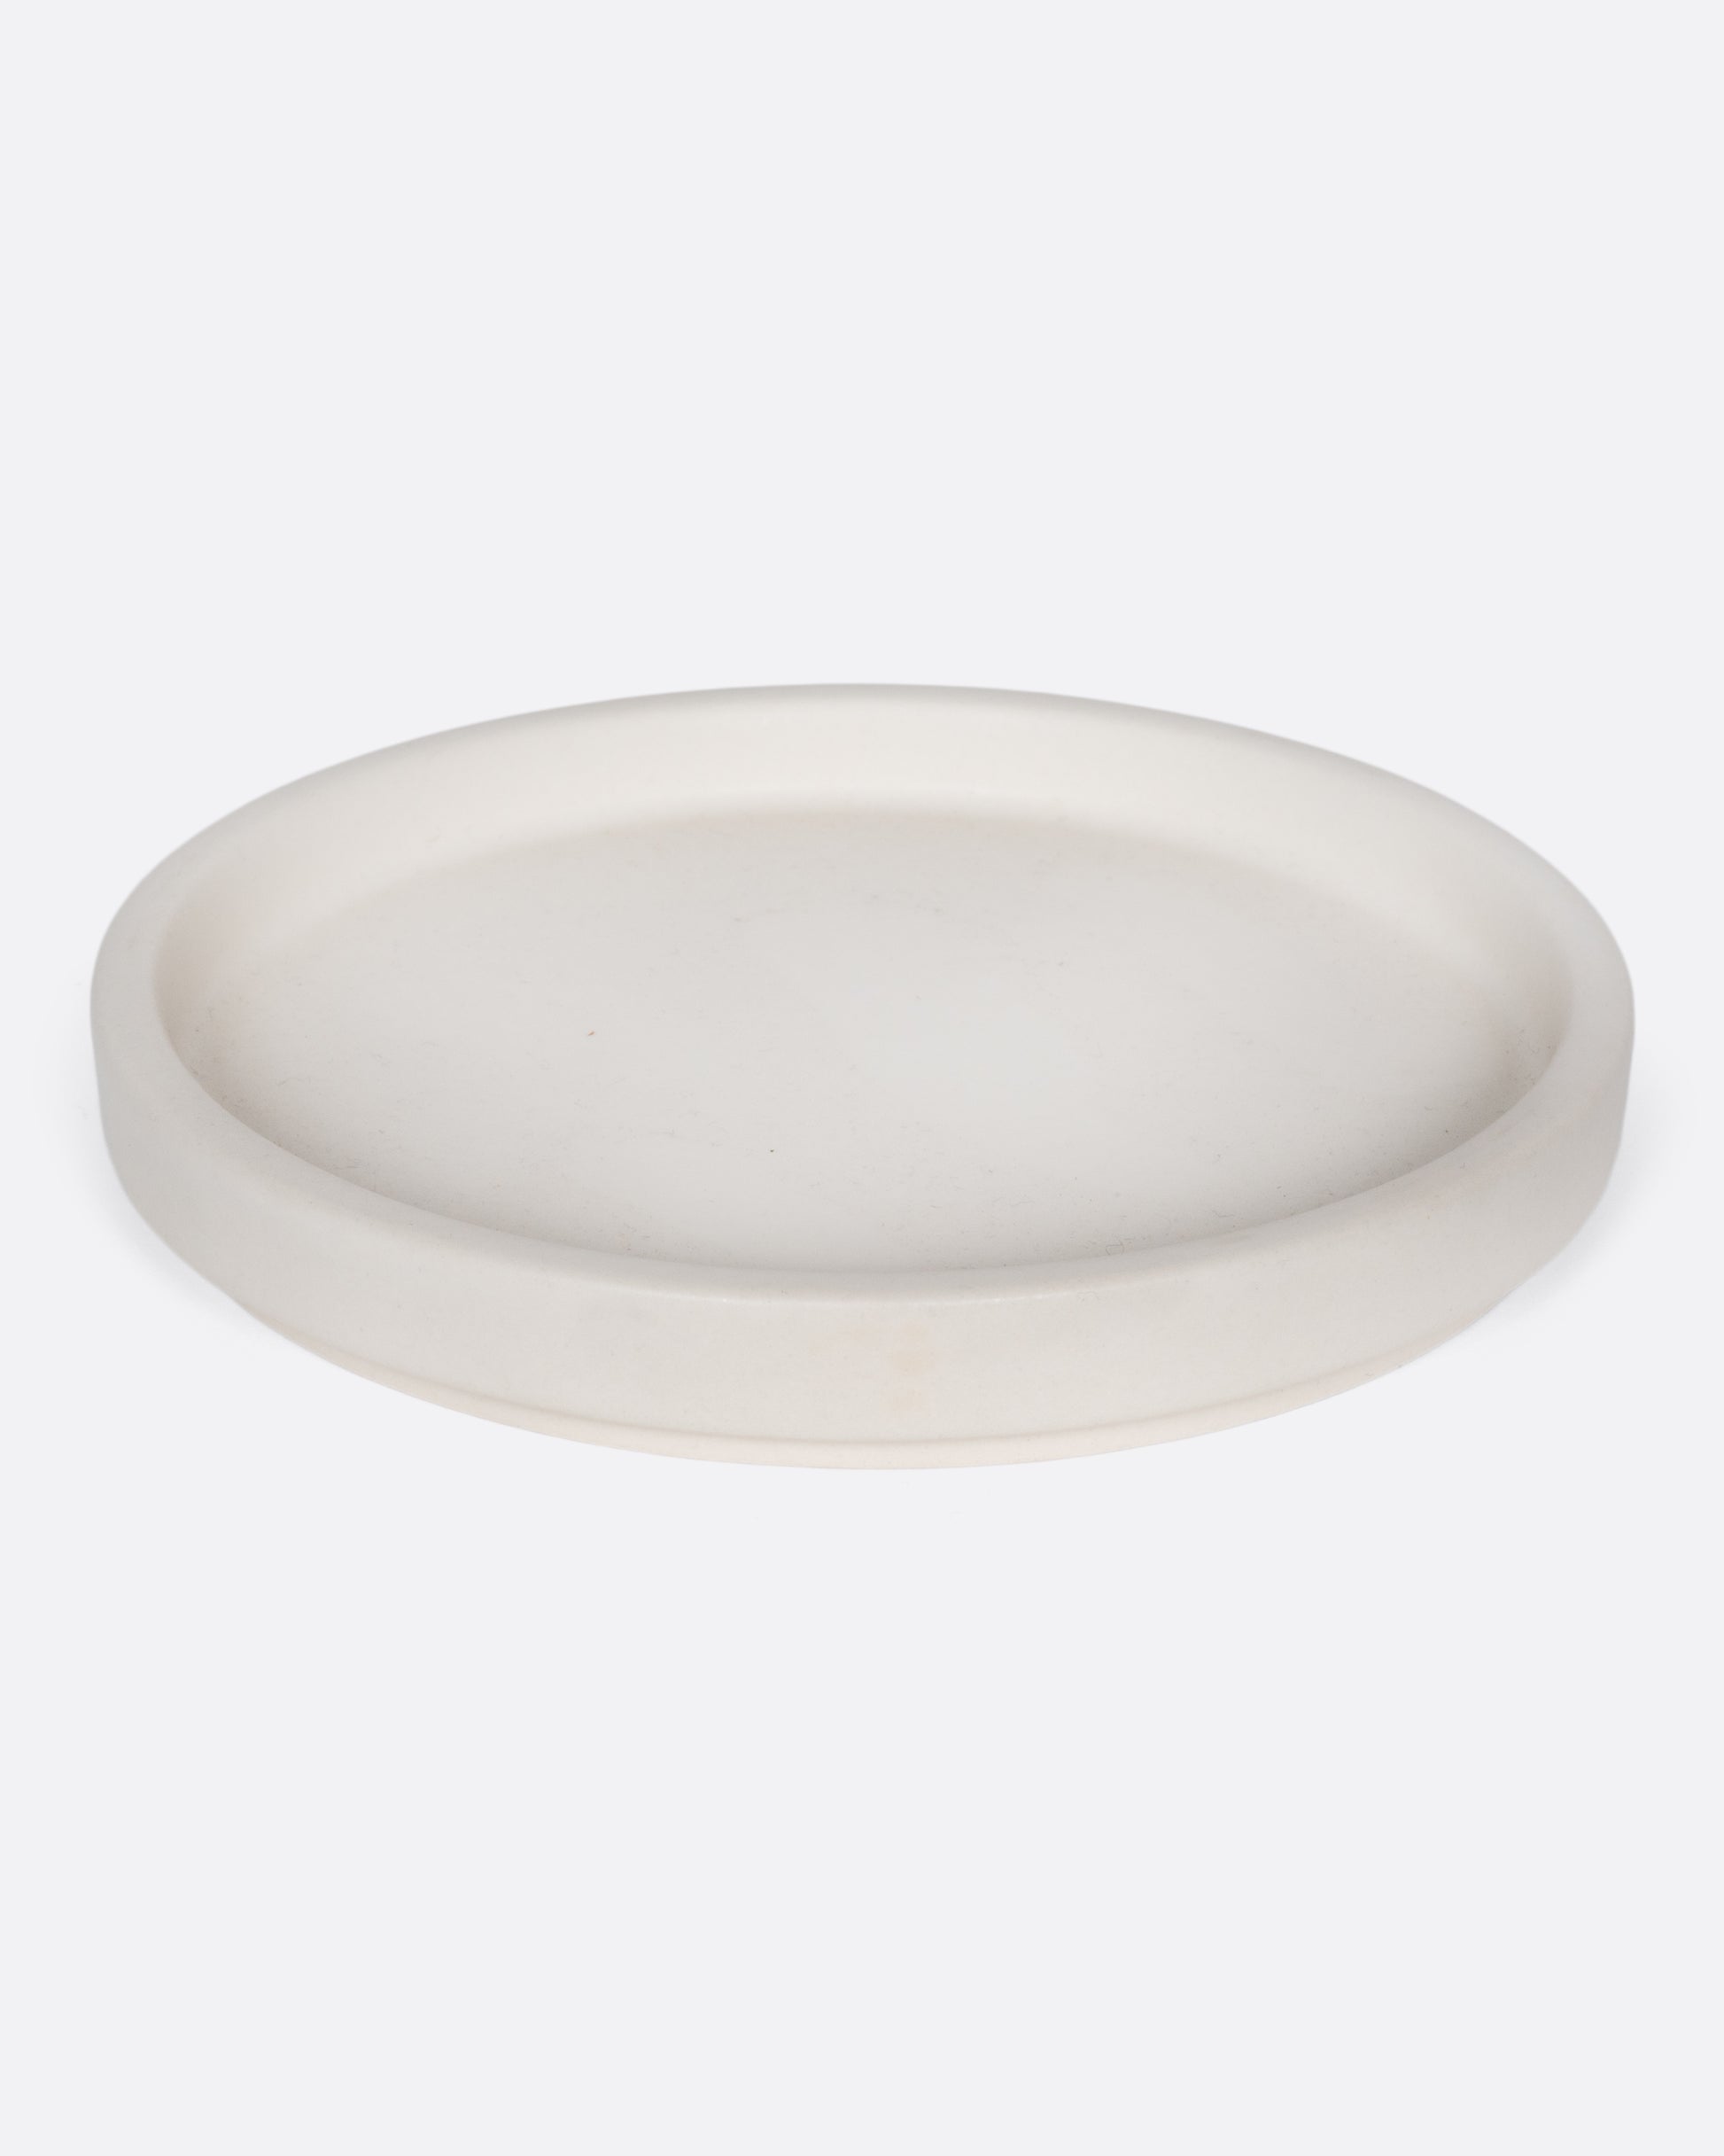 This creamy white ceramic plate with a raised lip and matte white finish looks beautiful with tall candles and works great for small plants, too.